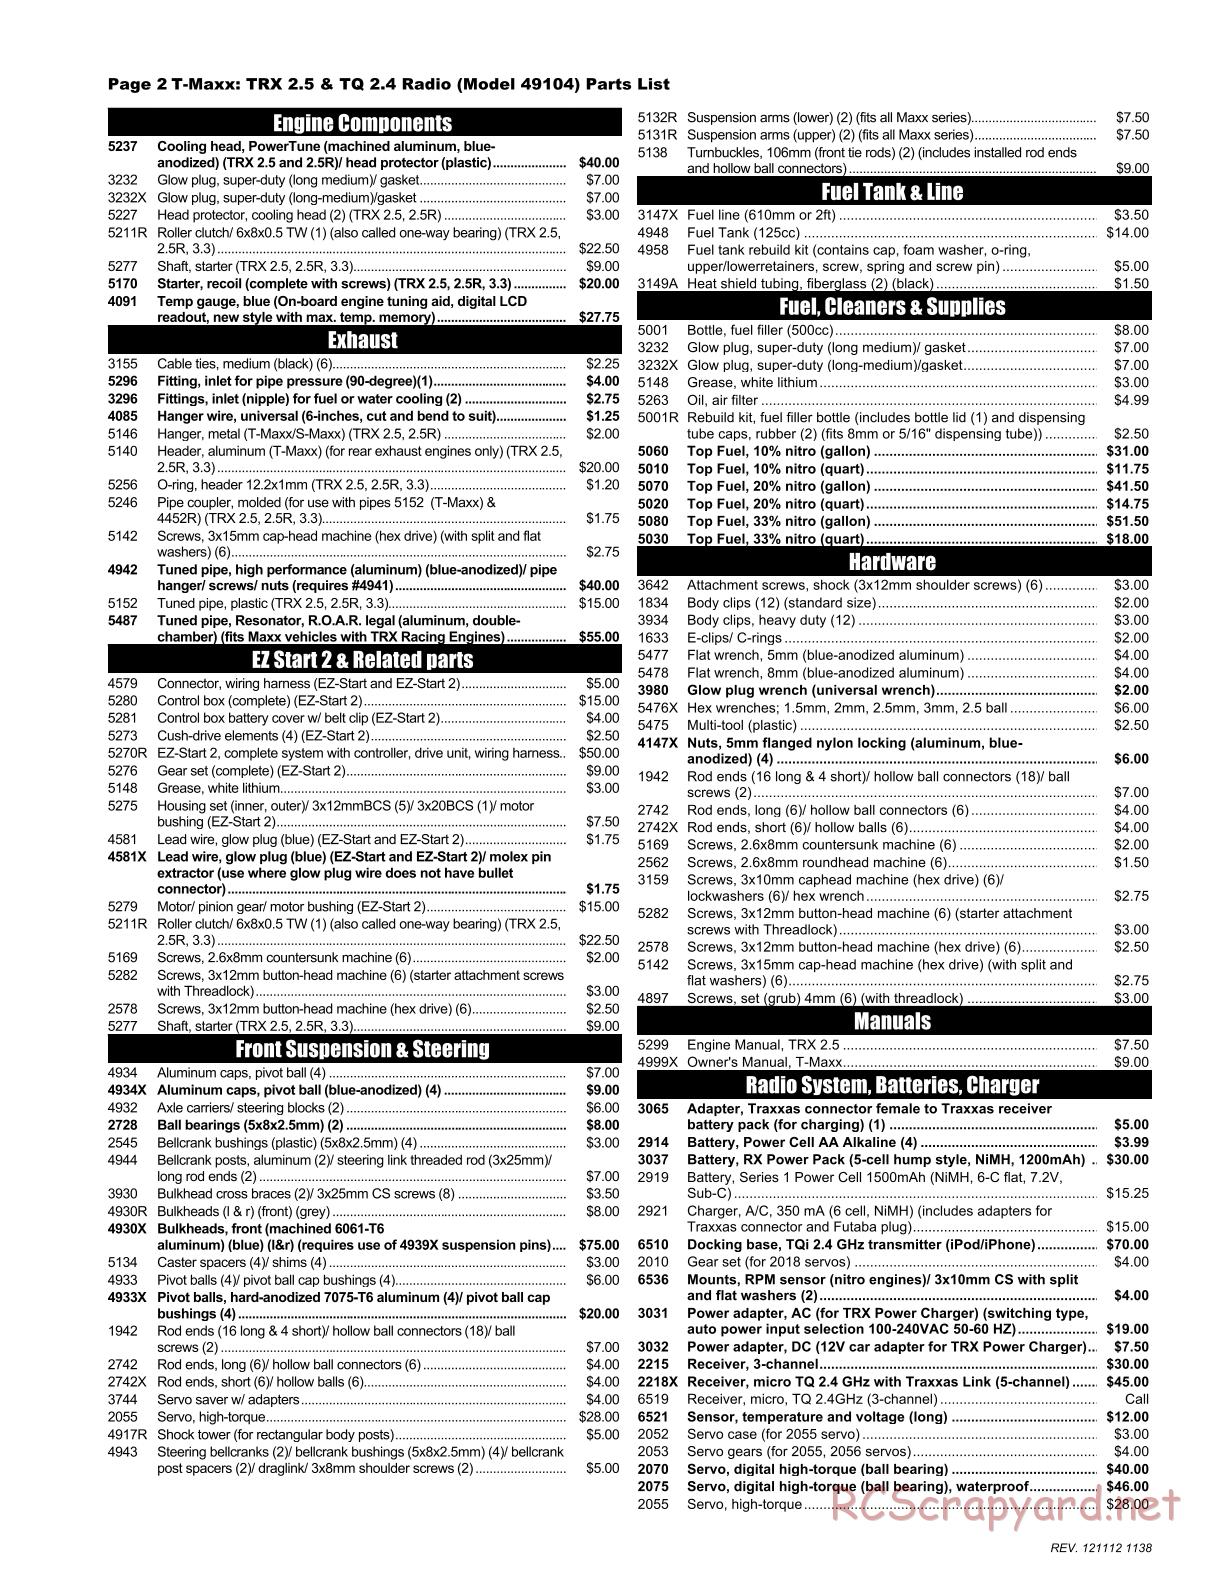 Traxxas - T-Maxx Classic (2013) - Parts List - Page 2